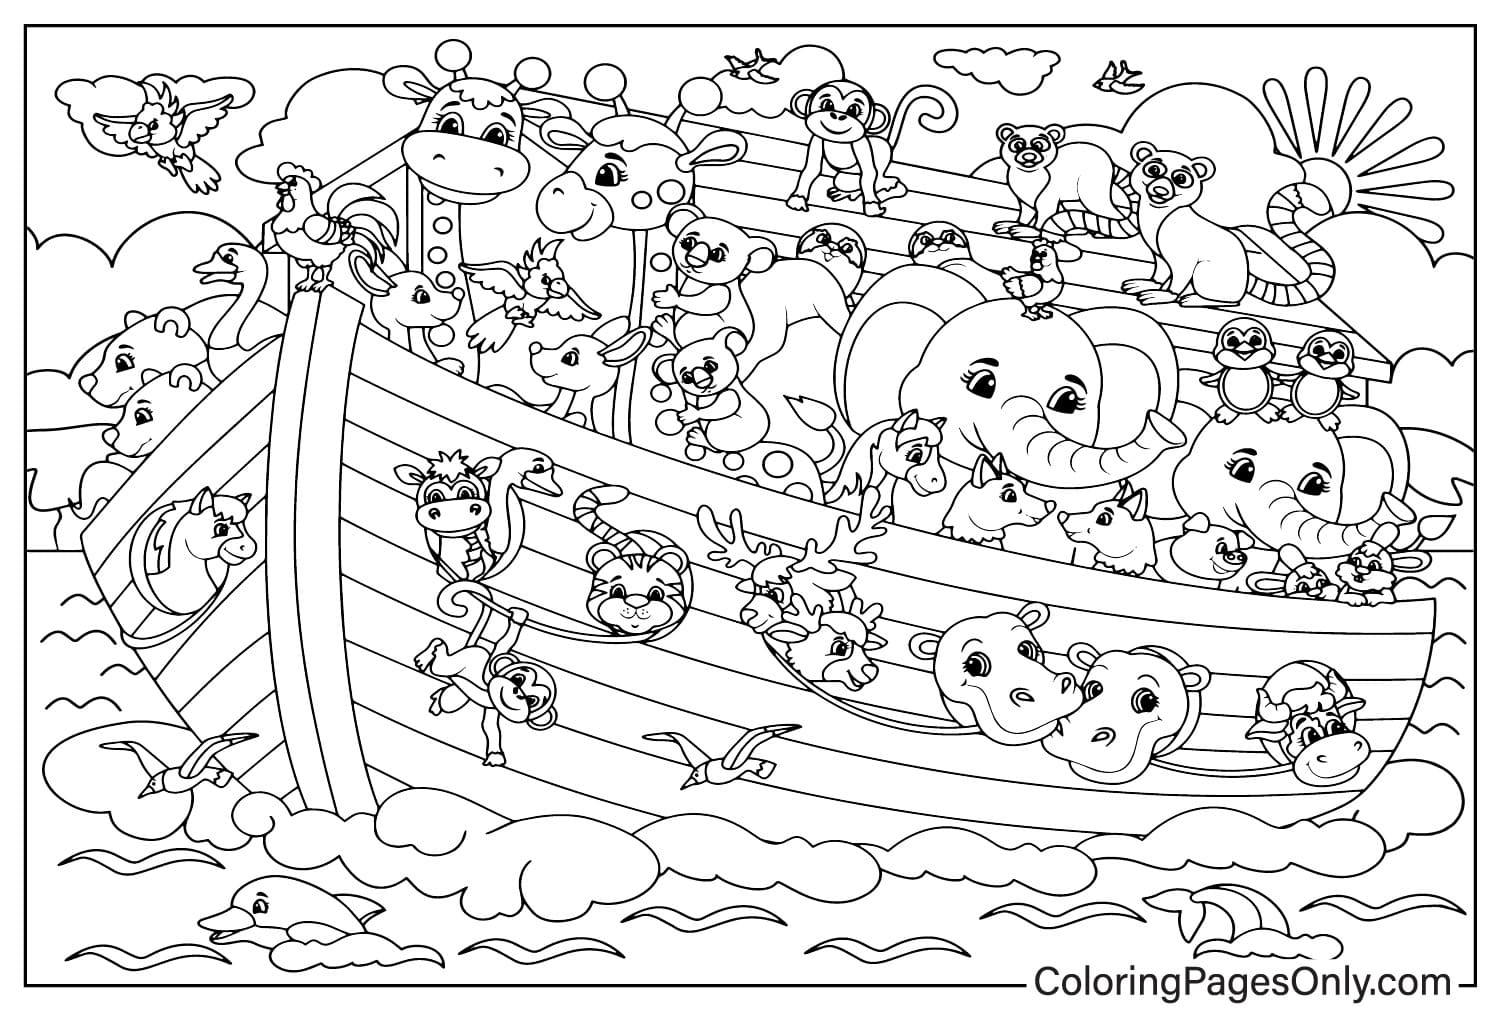 Simple Cartoon Noah with Ark Filled with Animals Coloring Sheet from Noah’s Ark